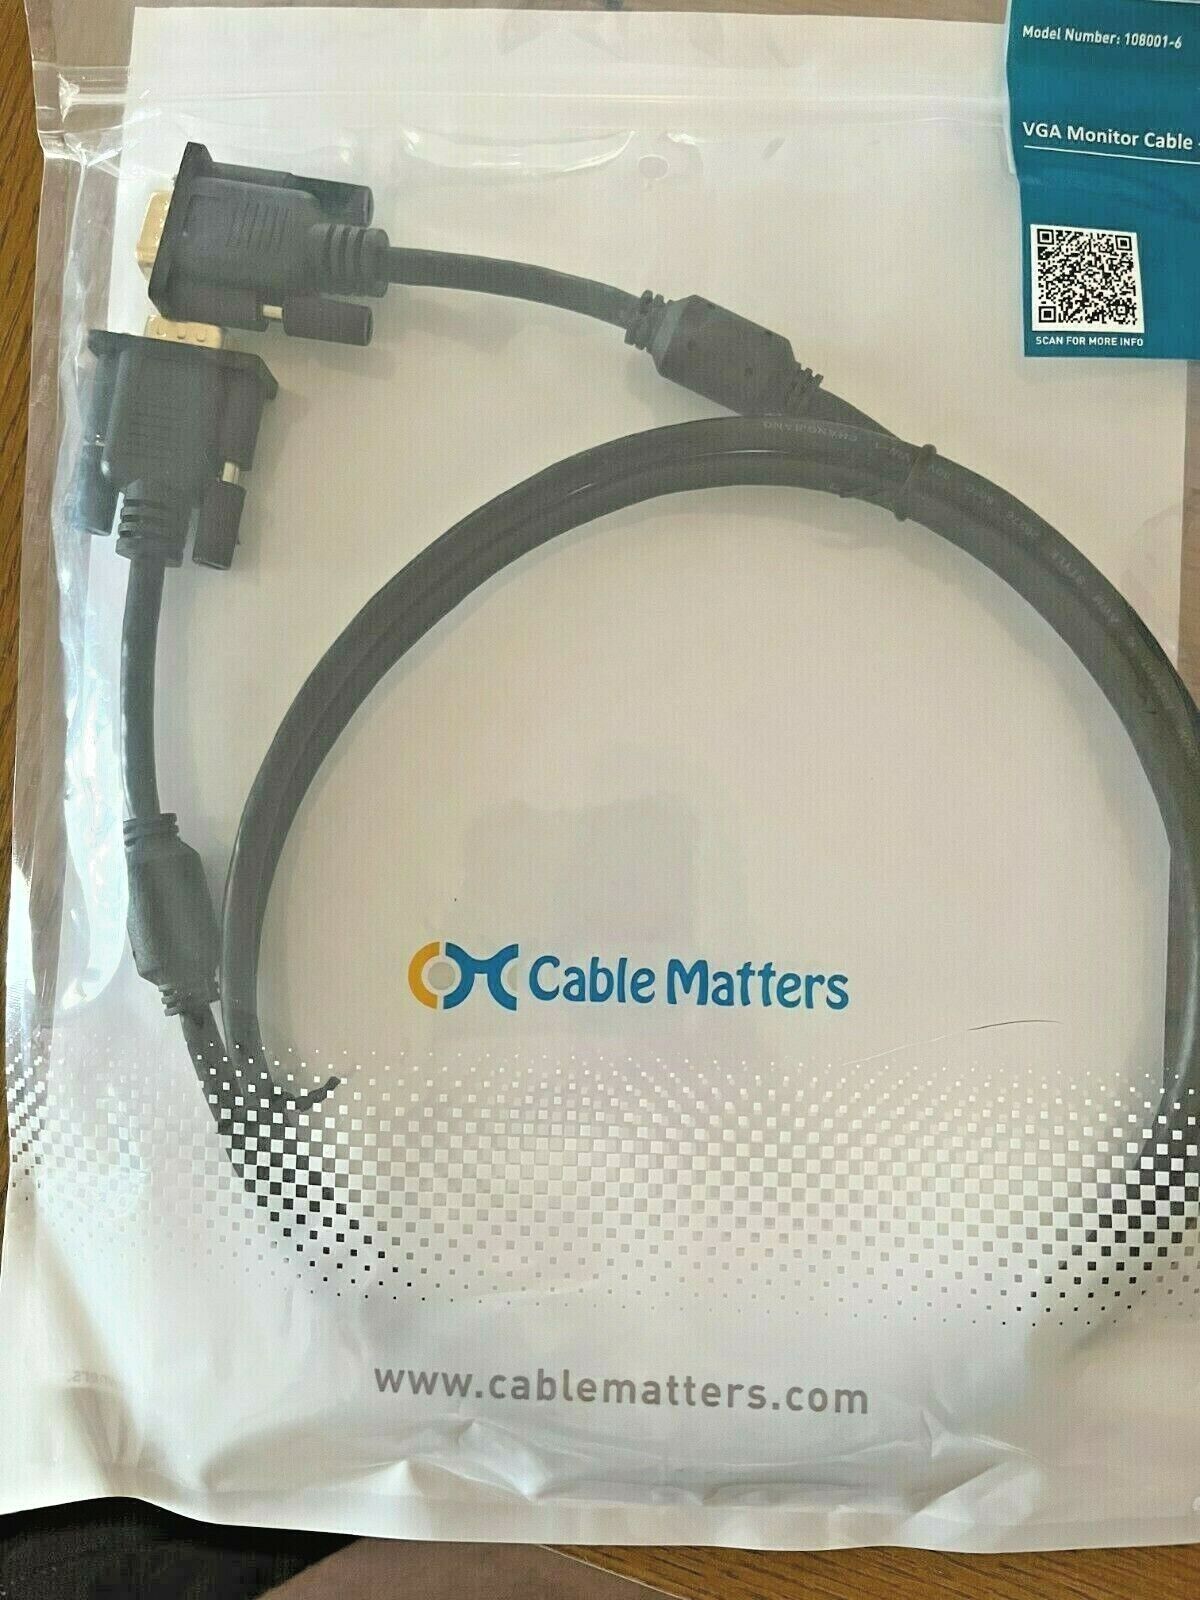 New Cable Matters VGA to VGA Cable (SVGA Cable) 6 Feet - Model 108001-6